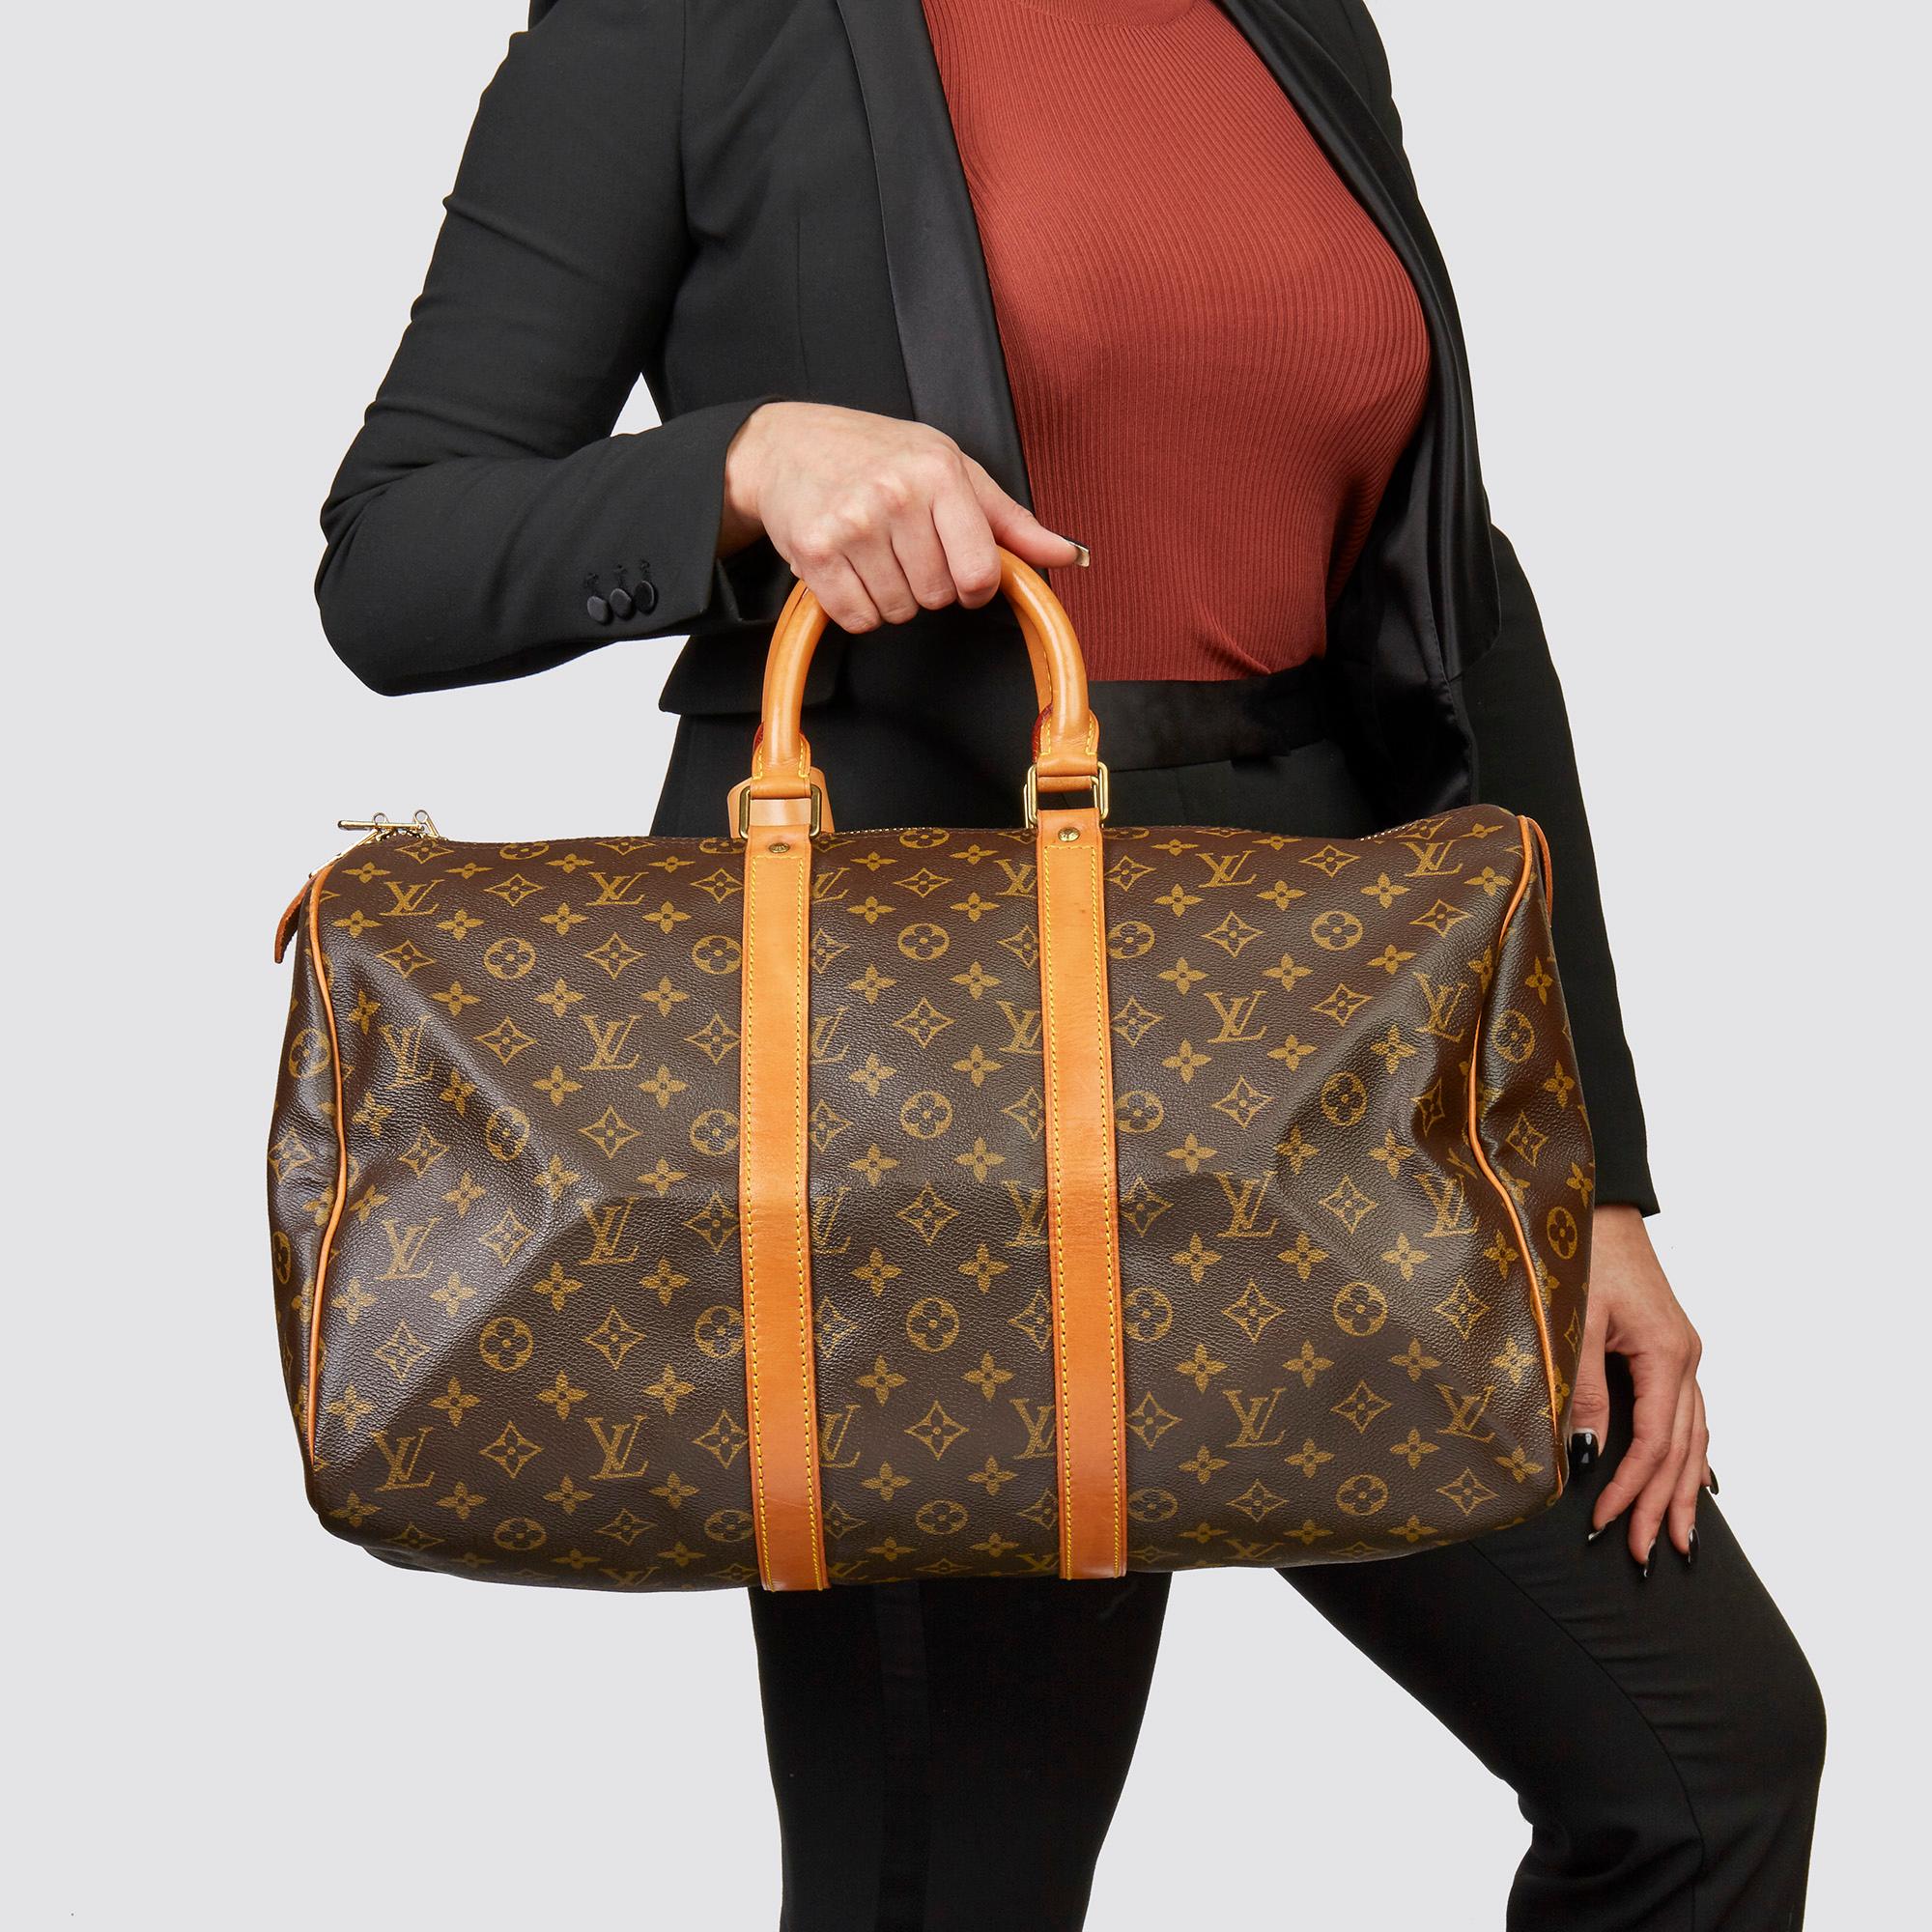 LOUIS VUITTON
Brown Monogram Coated Canvas & Vachetta Leather Vintage Keepall 45

Xupes Reference: HB3576
Serial Number: SP1917
Age (Circa): 1997
Accompanied By: Handle Keeper, Luggage Tag, Padlock, Keys
Authenticity Details: Date Stamp (Made in